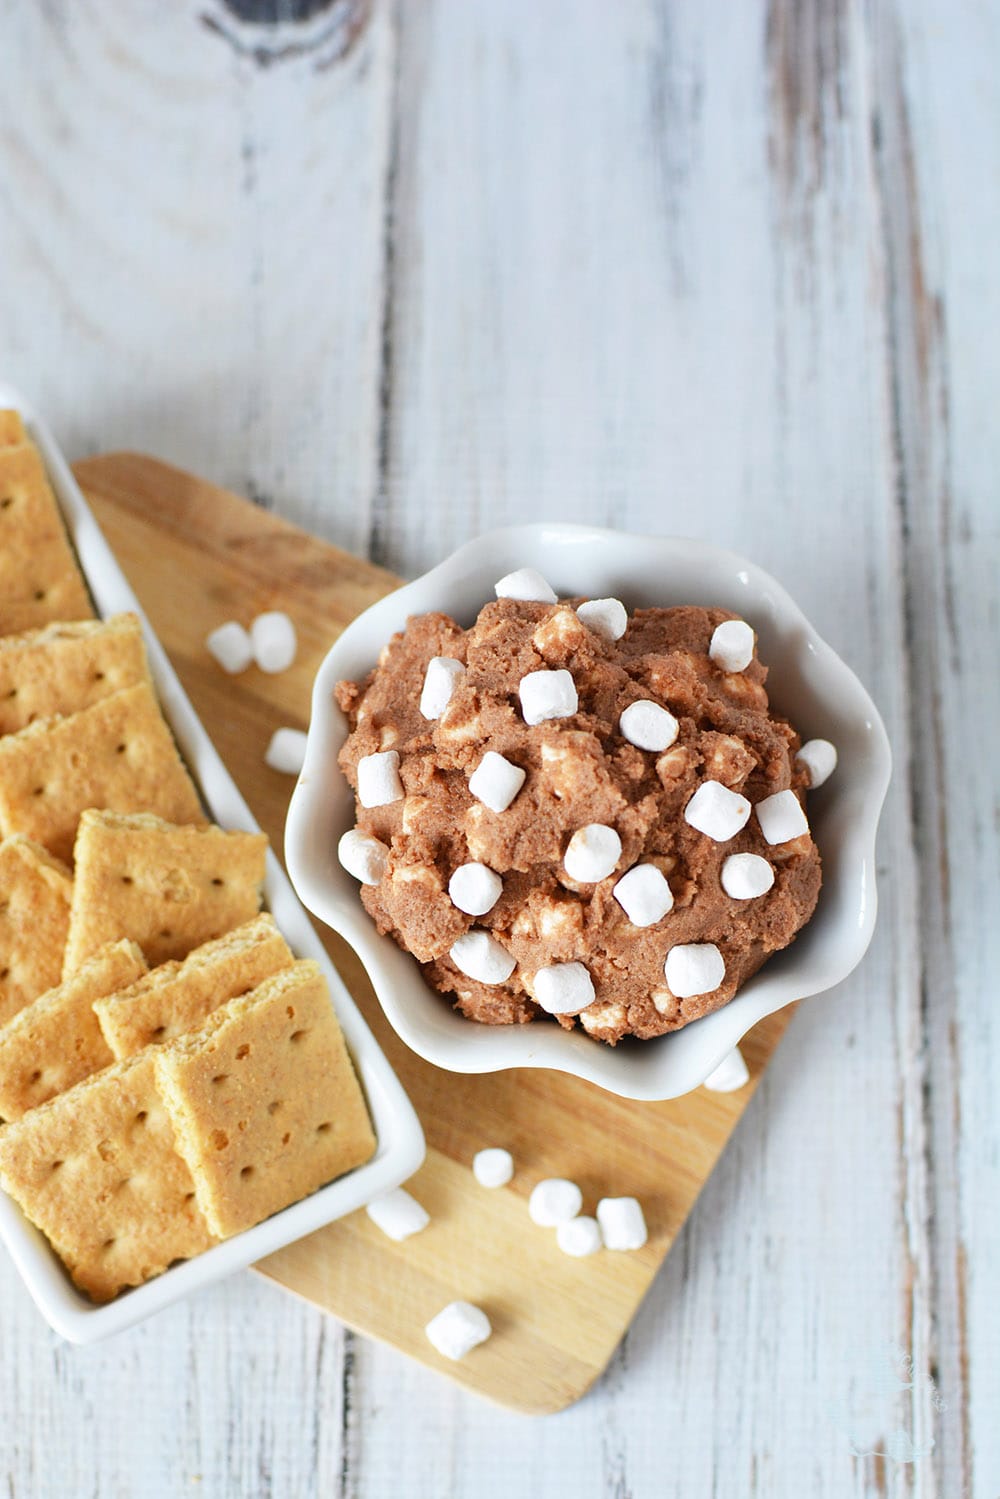 S'more Edible Cookie Dough with Graham Cracker Dippers